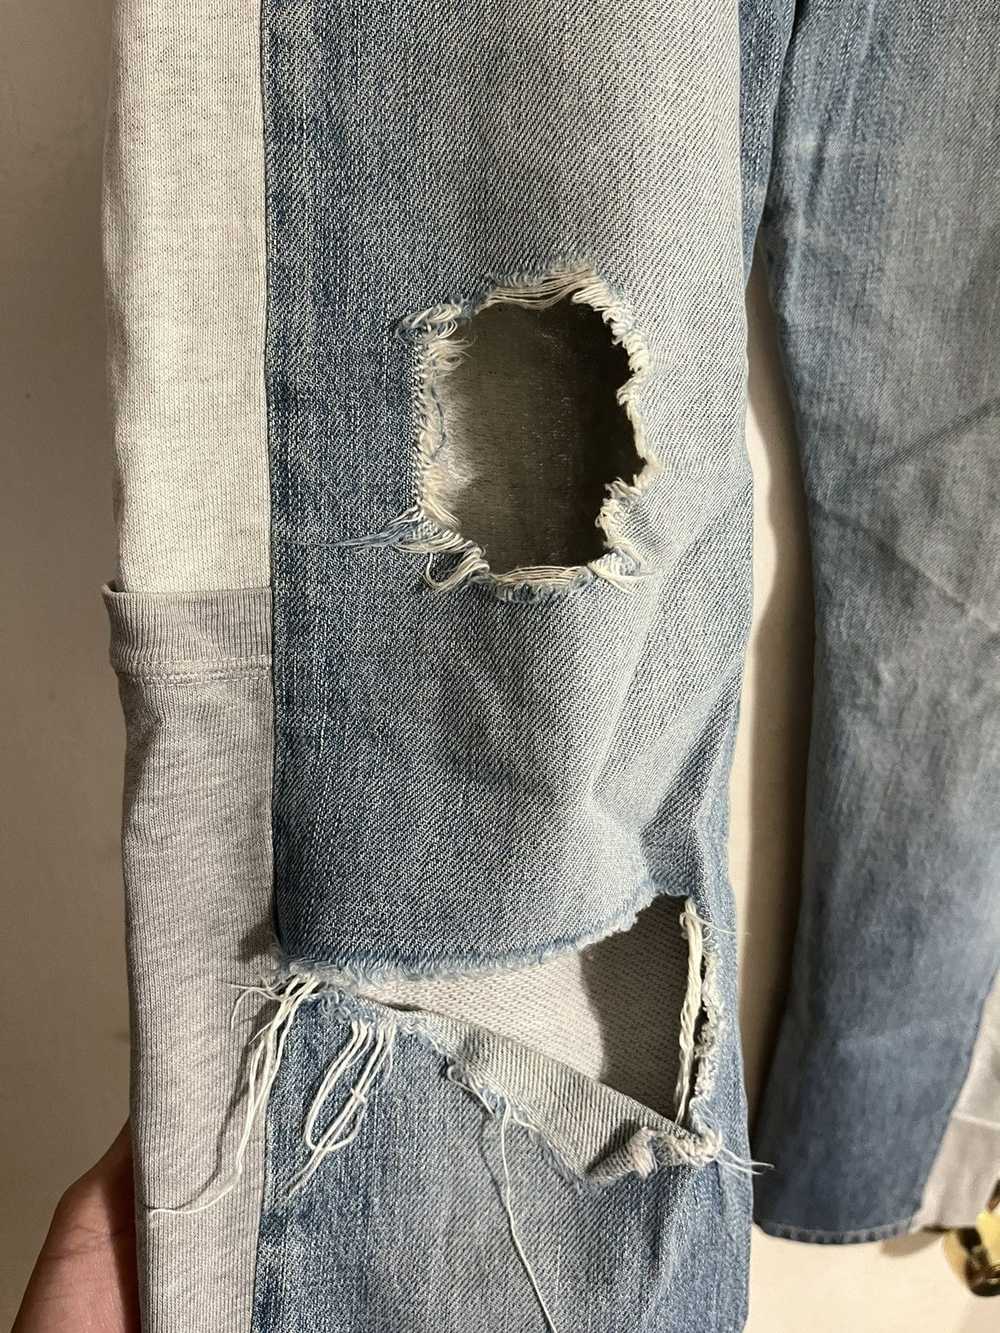 Undercover Undercover “IMMADTOO” hybrid denim - A… - image 3